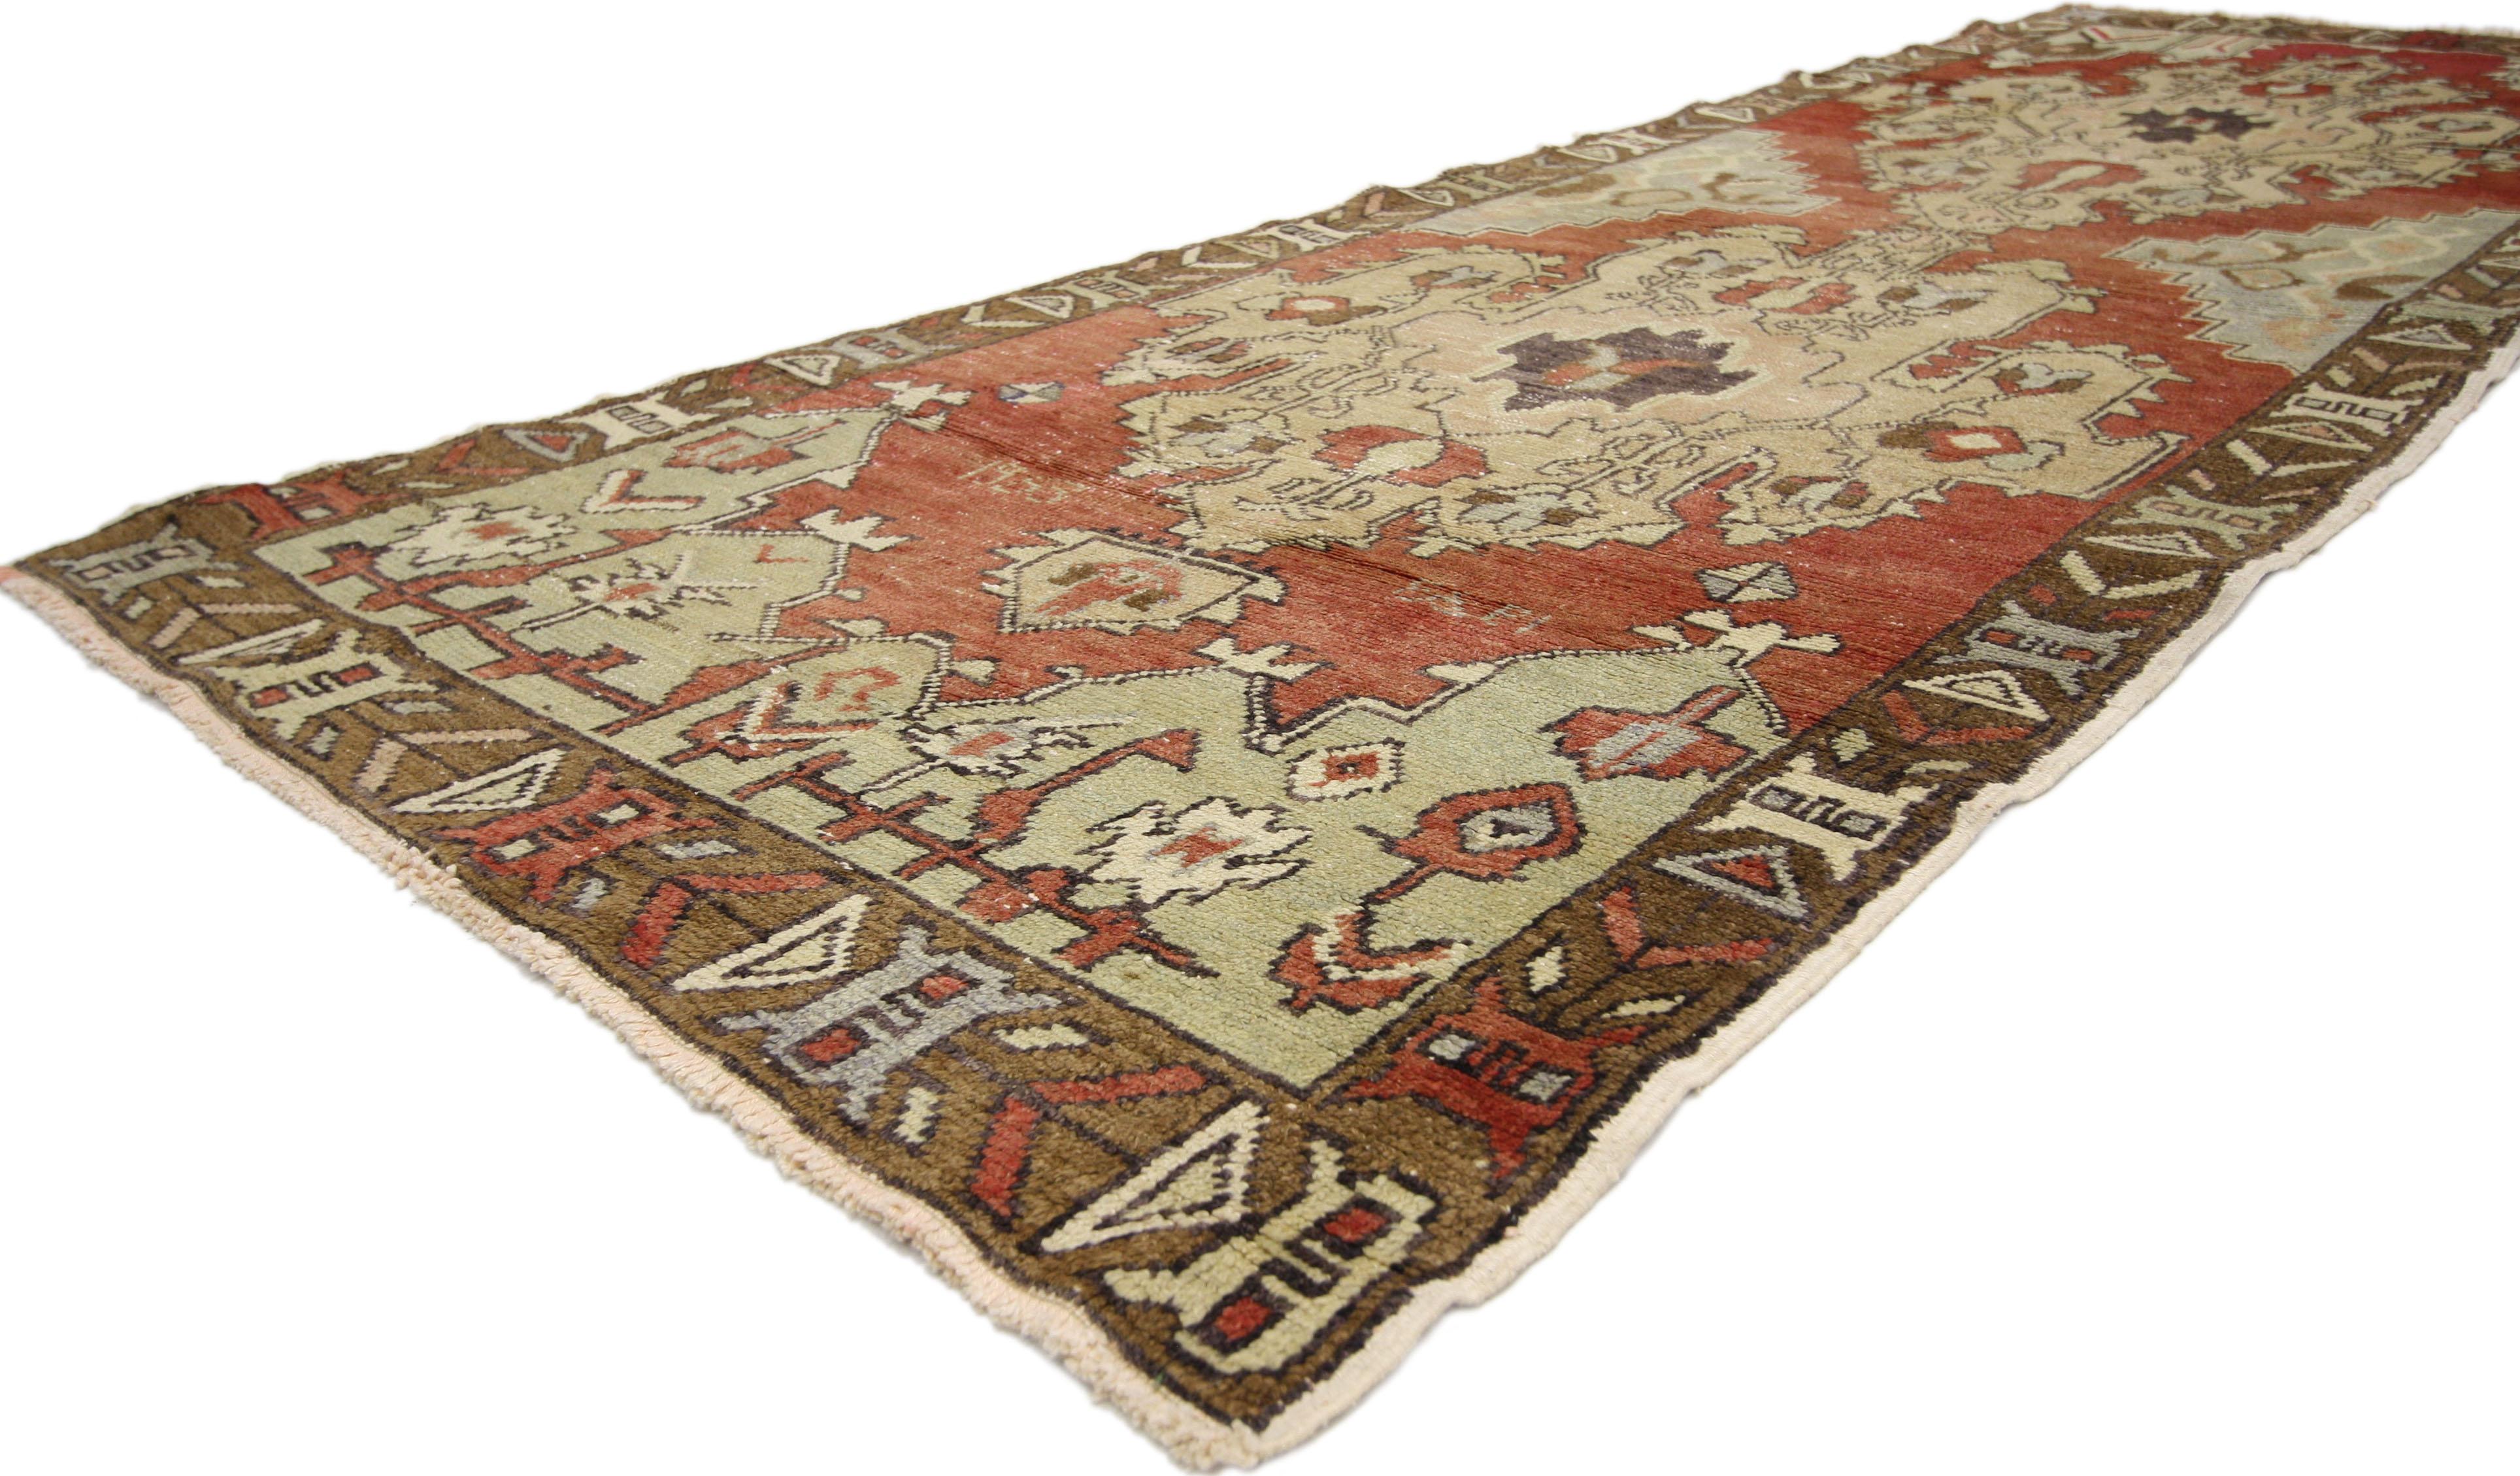 50261 Rustic style vintage Turkish Oushak runner, Hallway Runner. Formal and elaborate in style, this hand knotted wool vintage Oushak runner features a stately design bespeaking tradition and decorum. Dense ornament and double amulet medallions